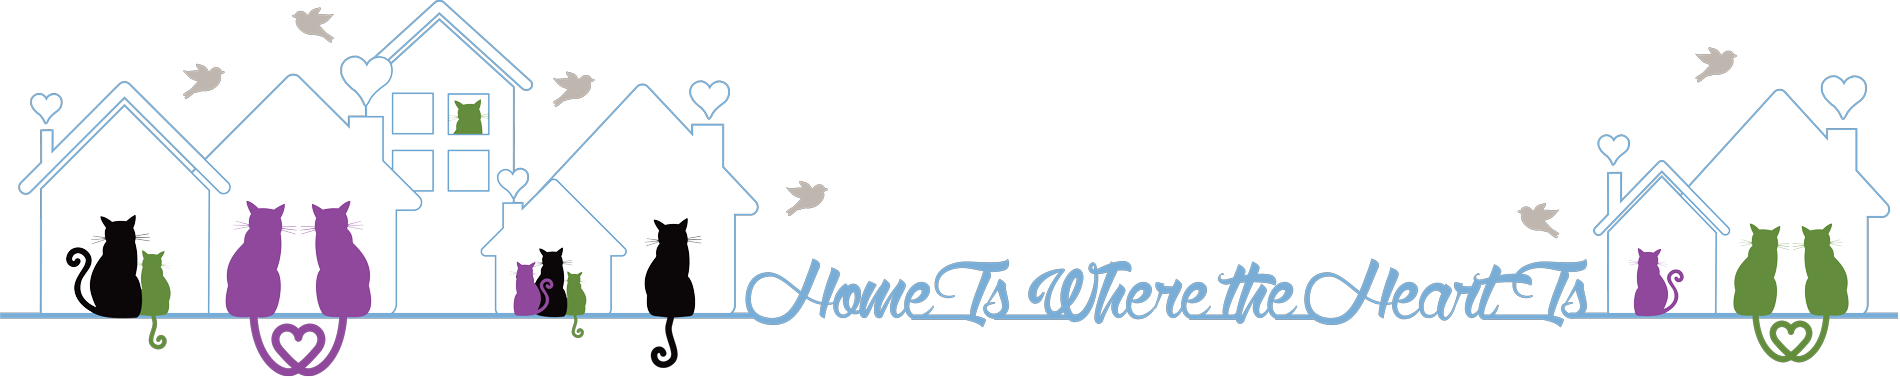 MRFRS_Graphic_HomeIsWhereTheHeartIs-Words_200804